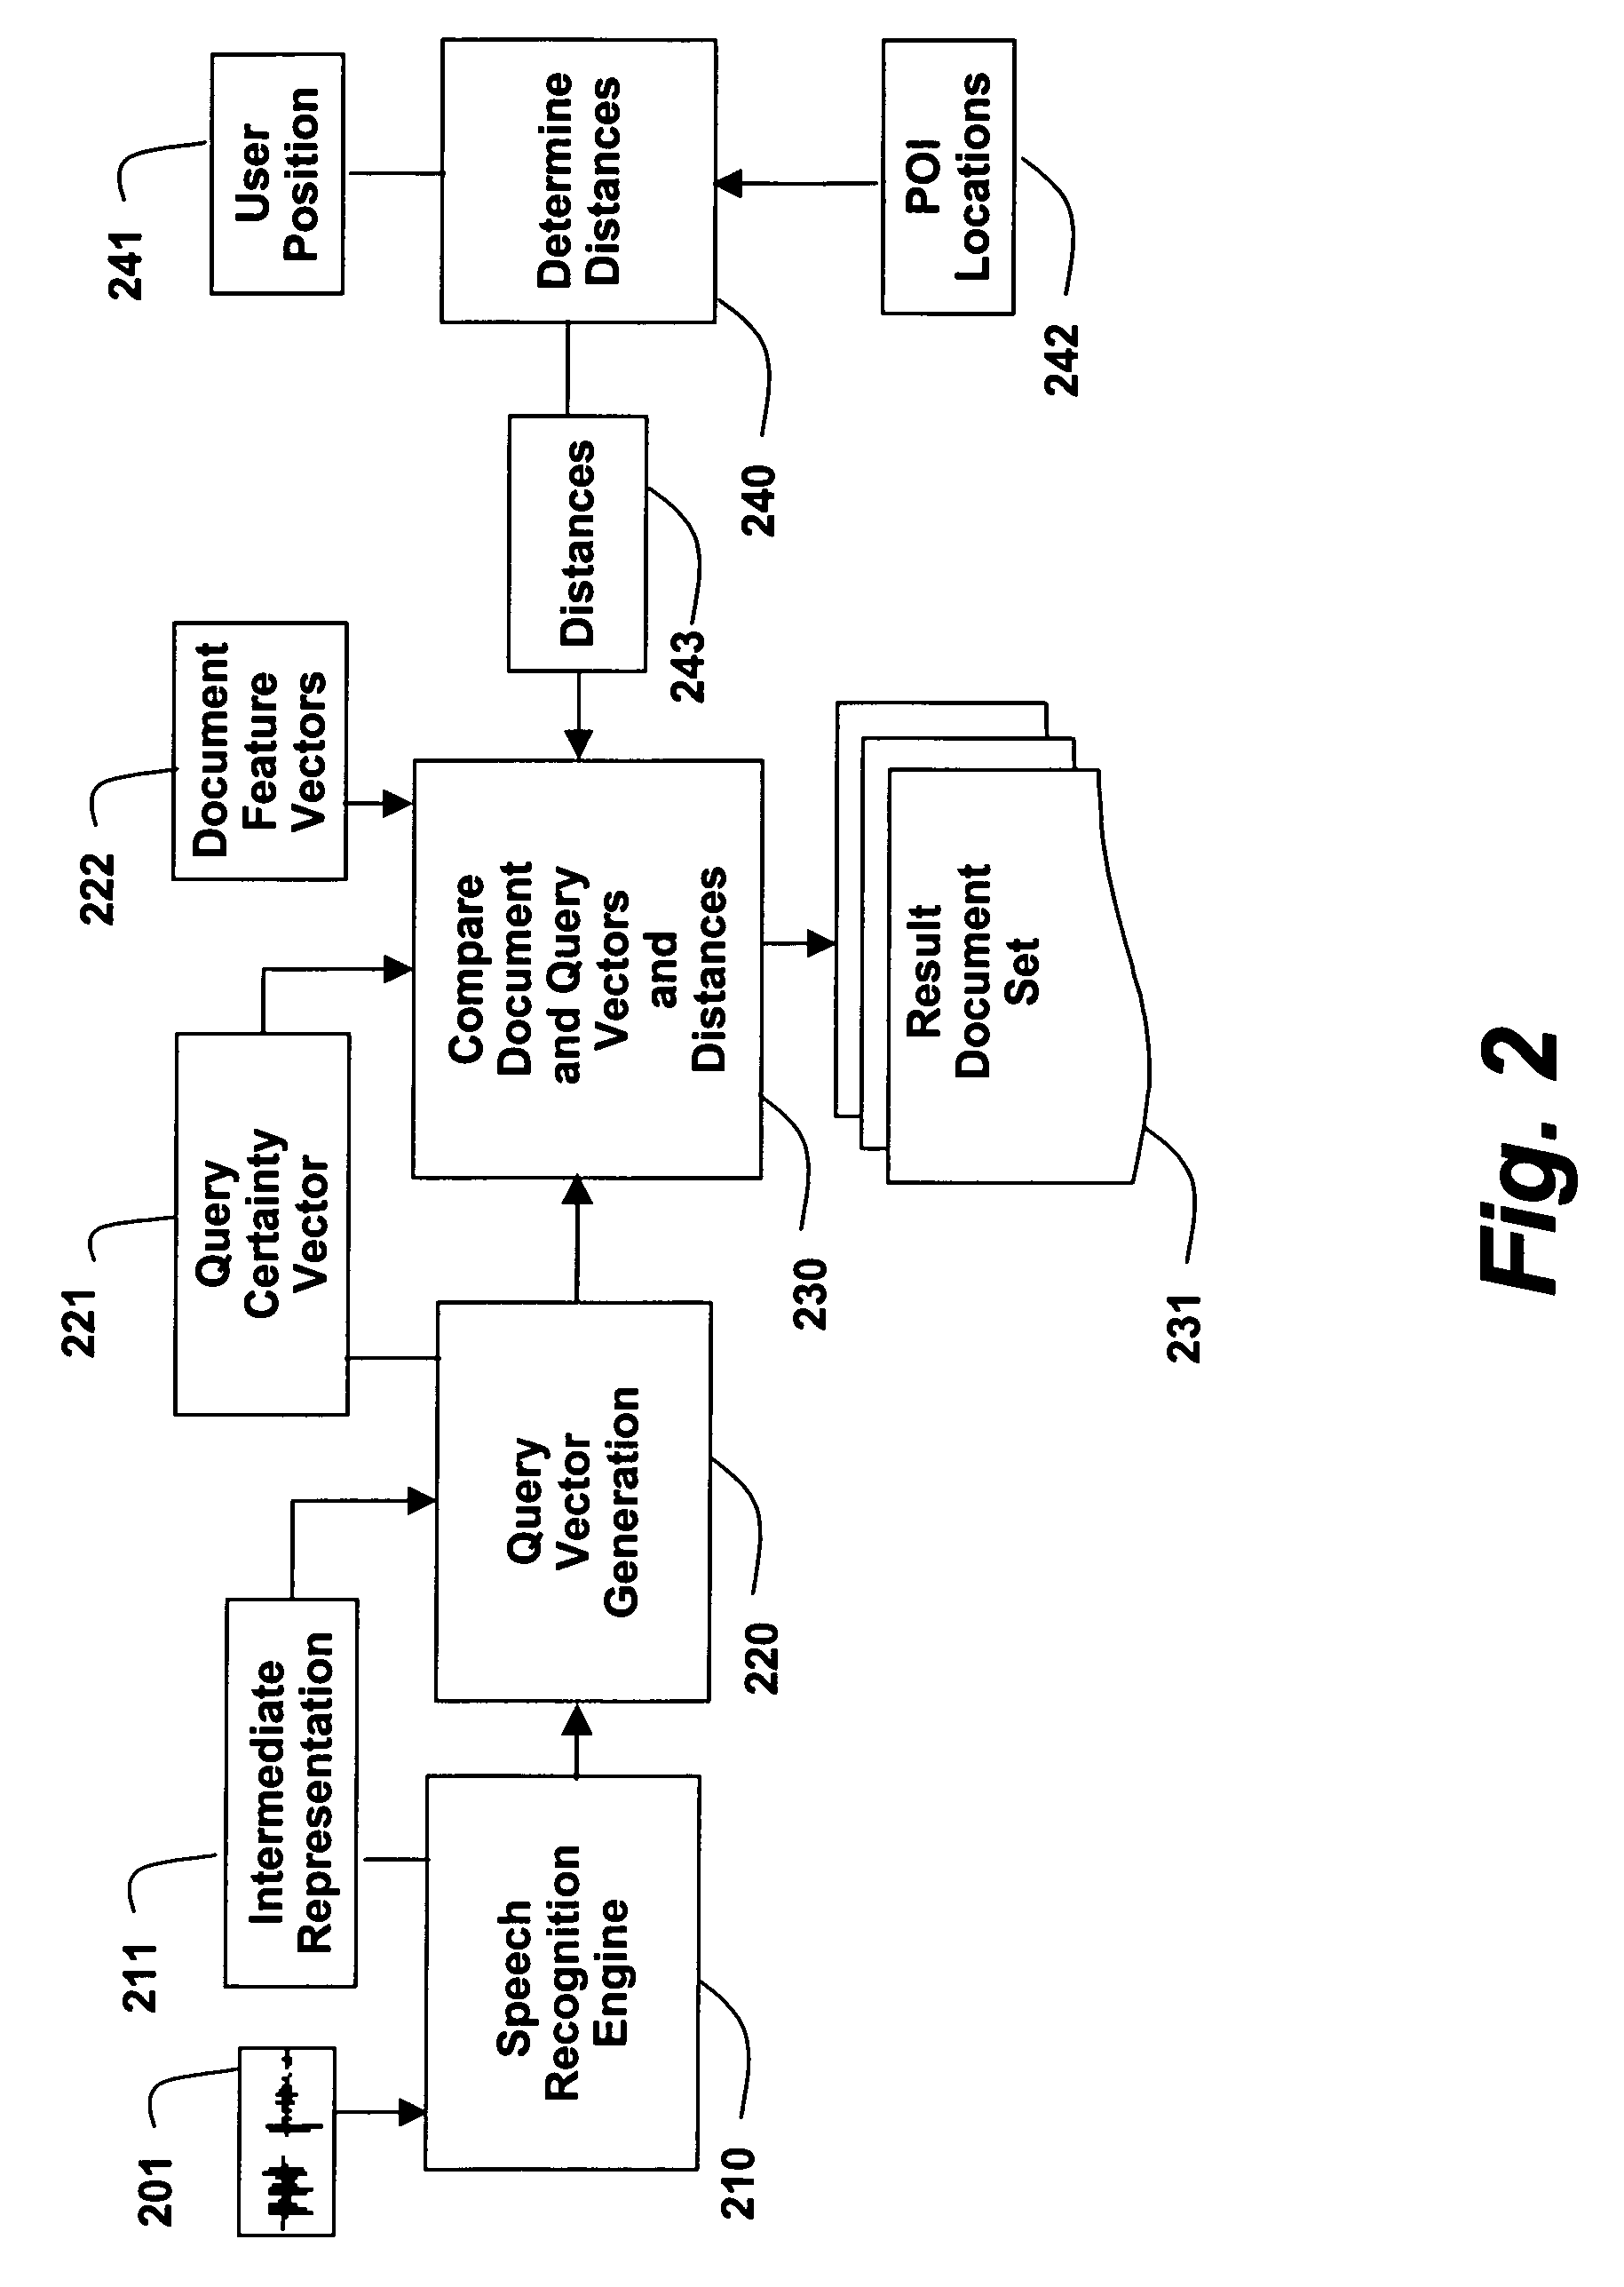 Method and system for retrieving documents with spoken queries